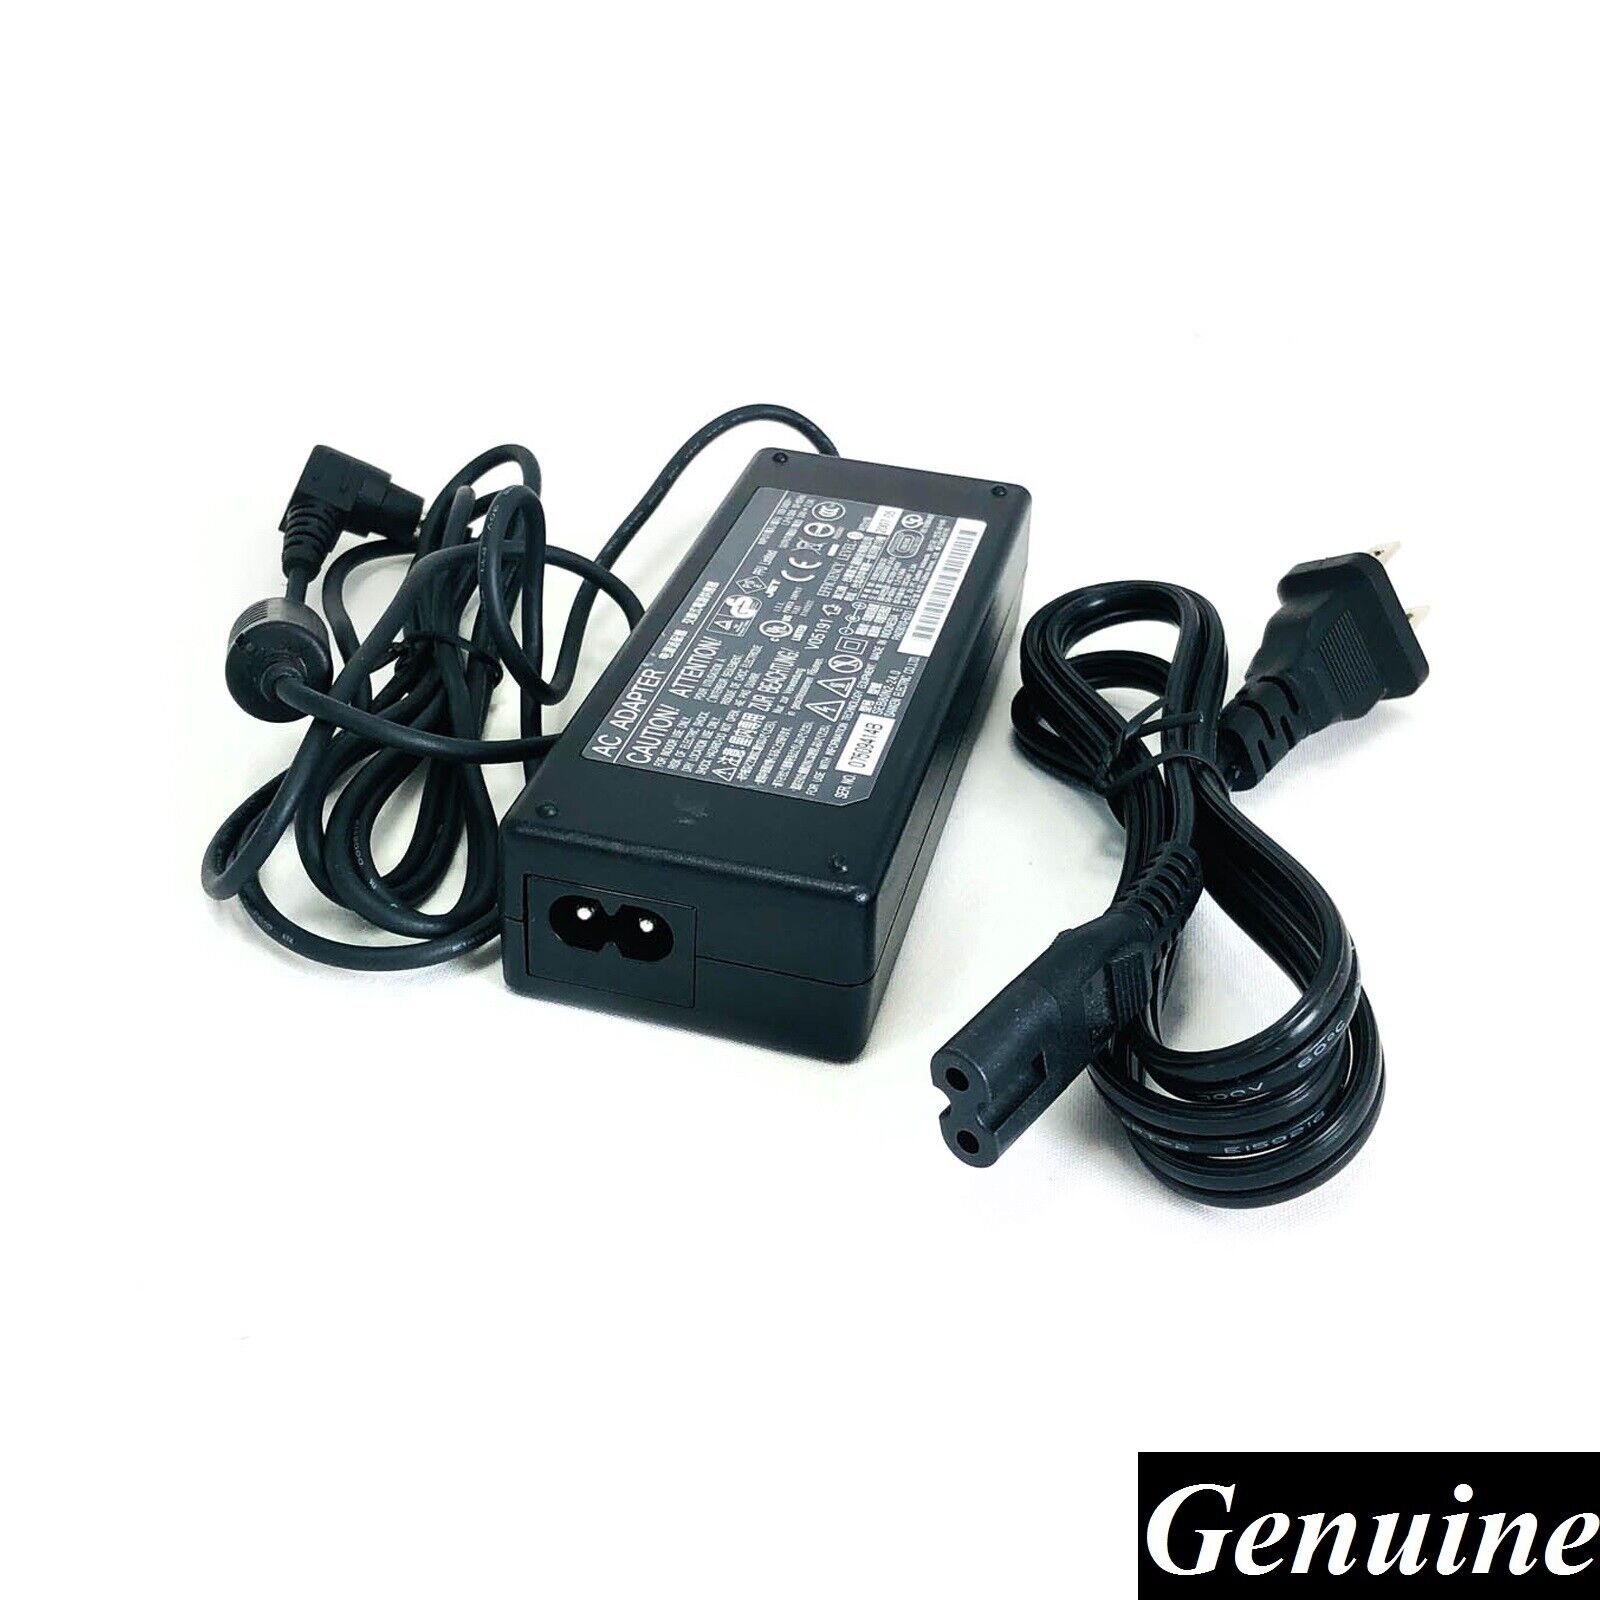 Genuine AC Charger Adapter for Fujitsu Image Scanner FI-Series w/Power Cord